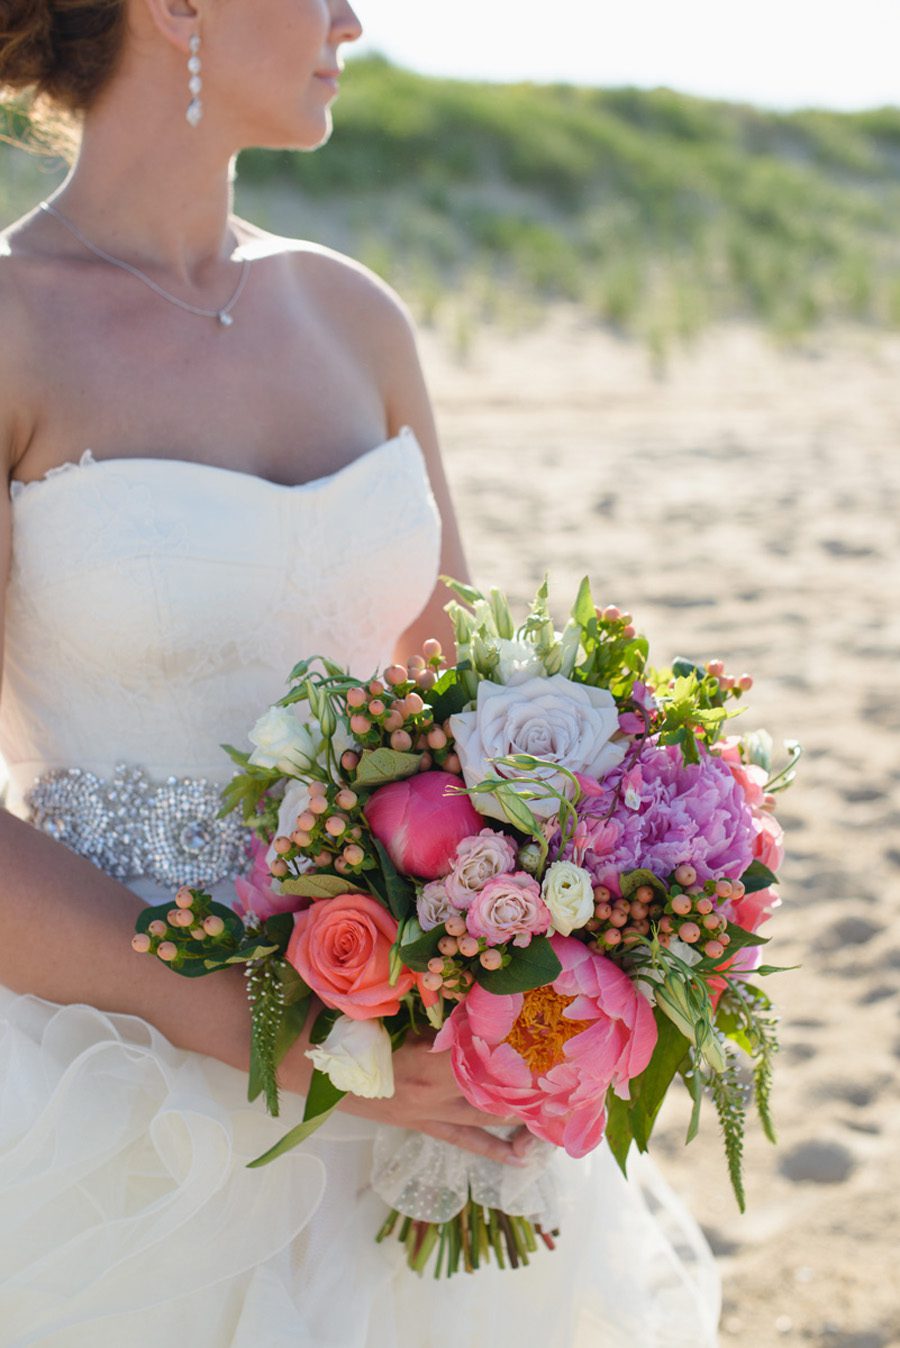 Jessica and Tom's Outer Banks wedding by Neil GT Photography Bride Flowers